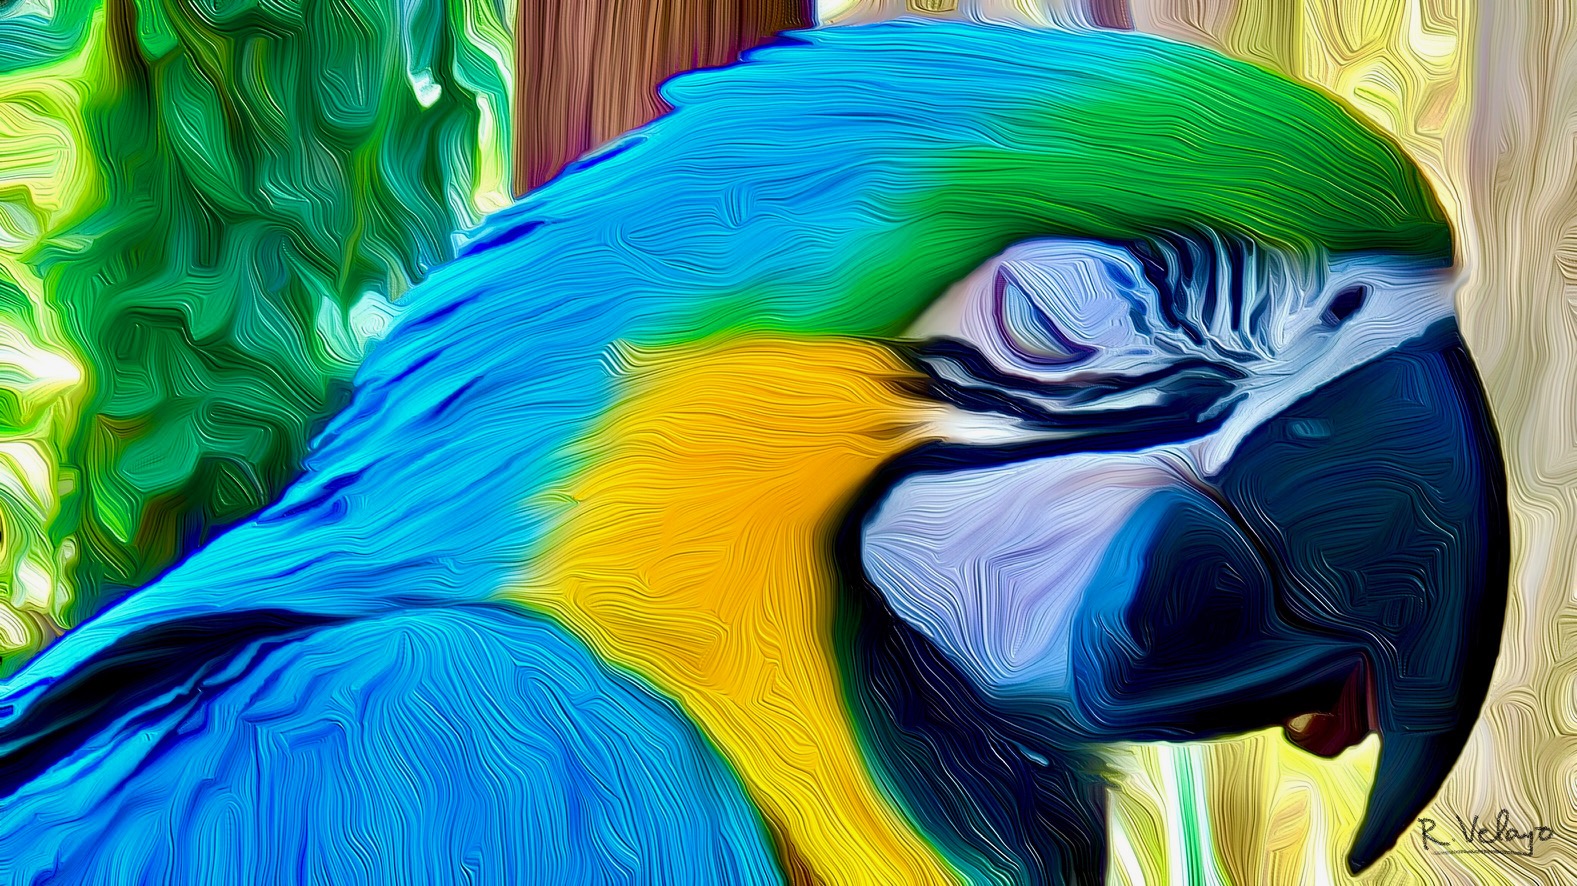 "SLEEPY BLUE AND GOLD MACAW AT WILD FLORIDA" [Created: 3/04/2021]